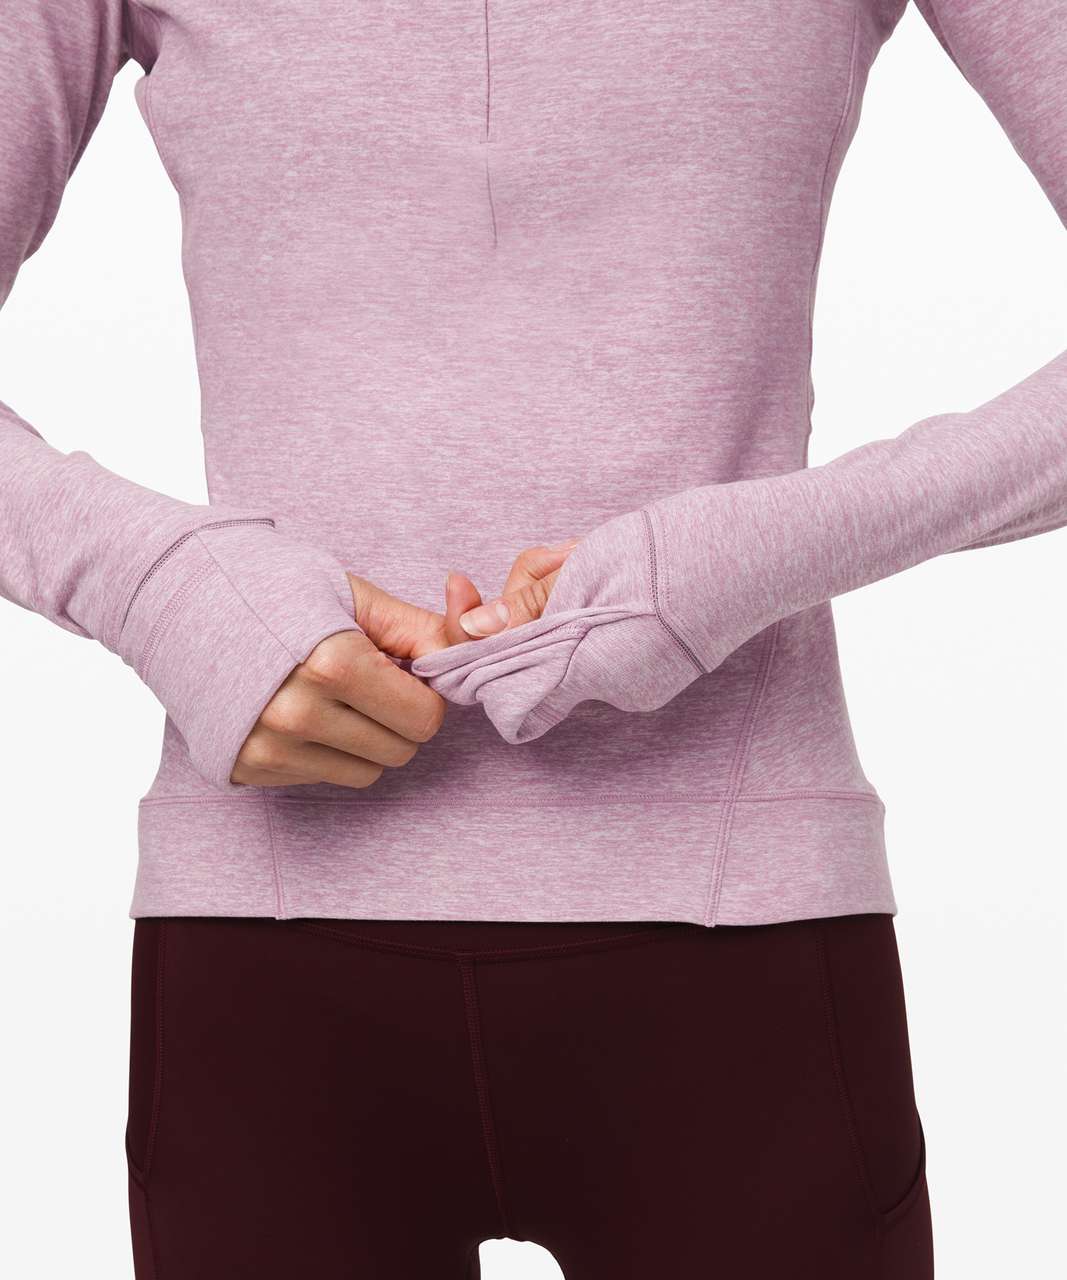 Lululemon Outrun the Elements 1/2 Zip - Heathered Pink Taupe